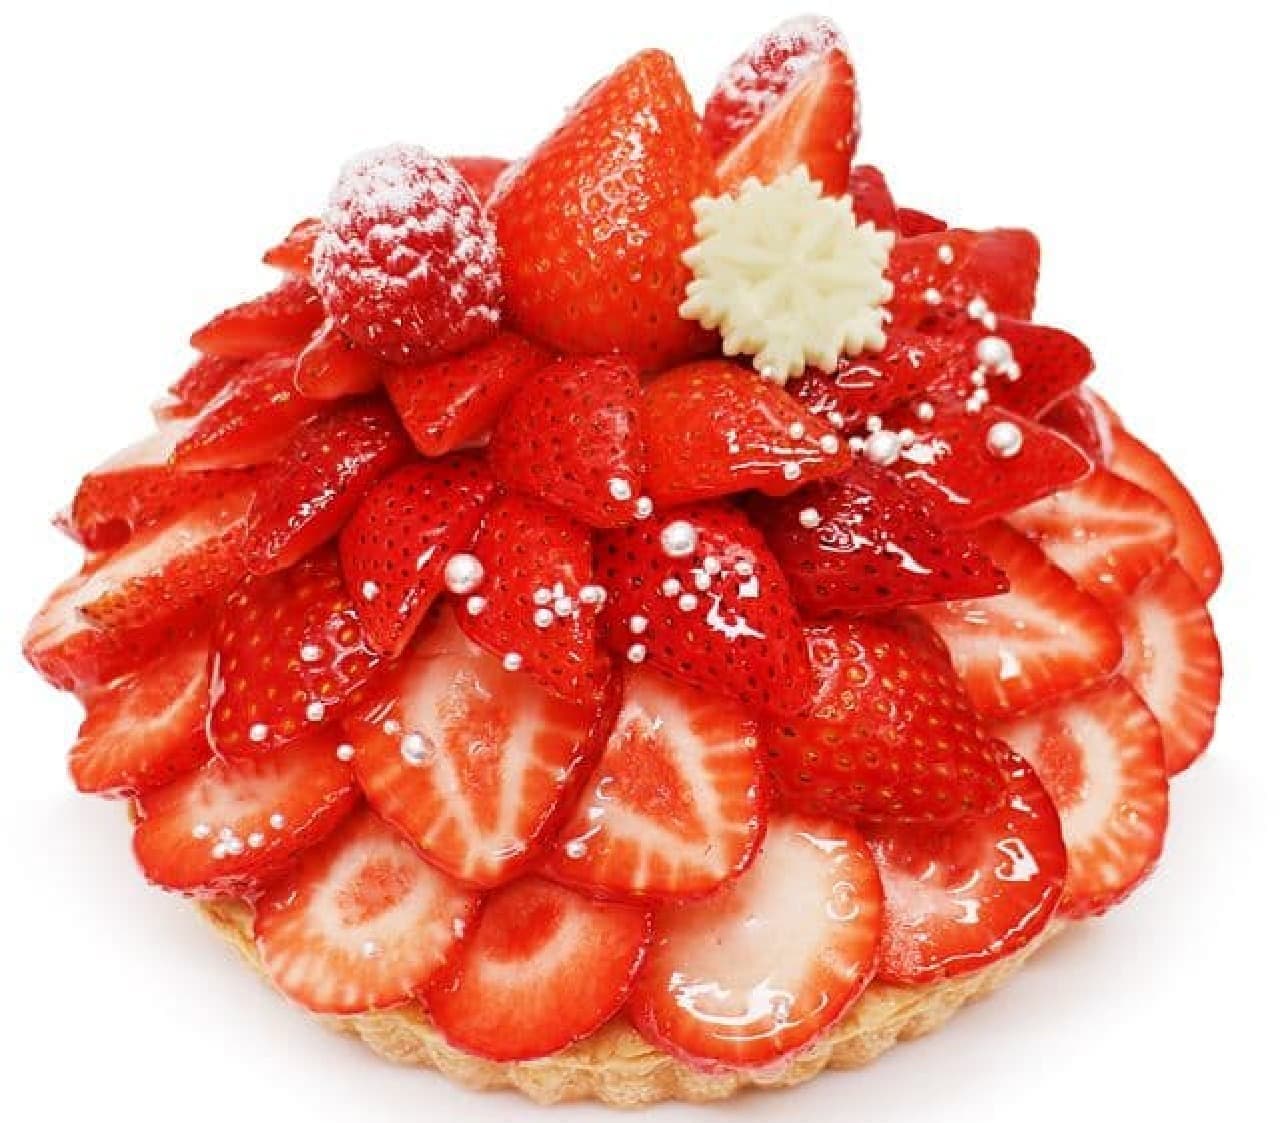 Cafe comme ca strawberry "Amaou" cake from Fukuoka prefecture